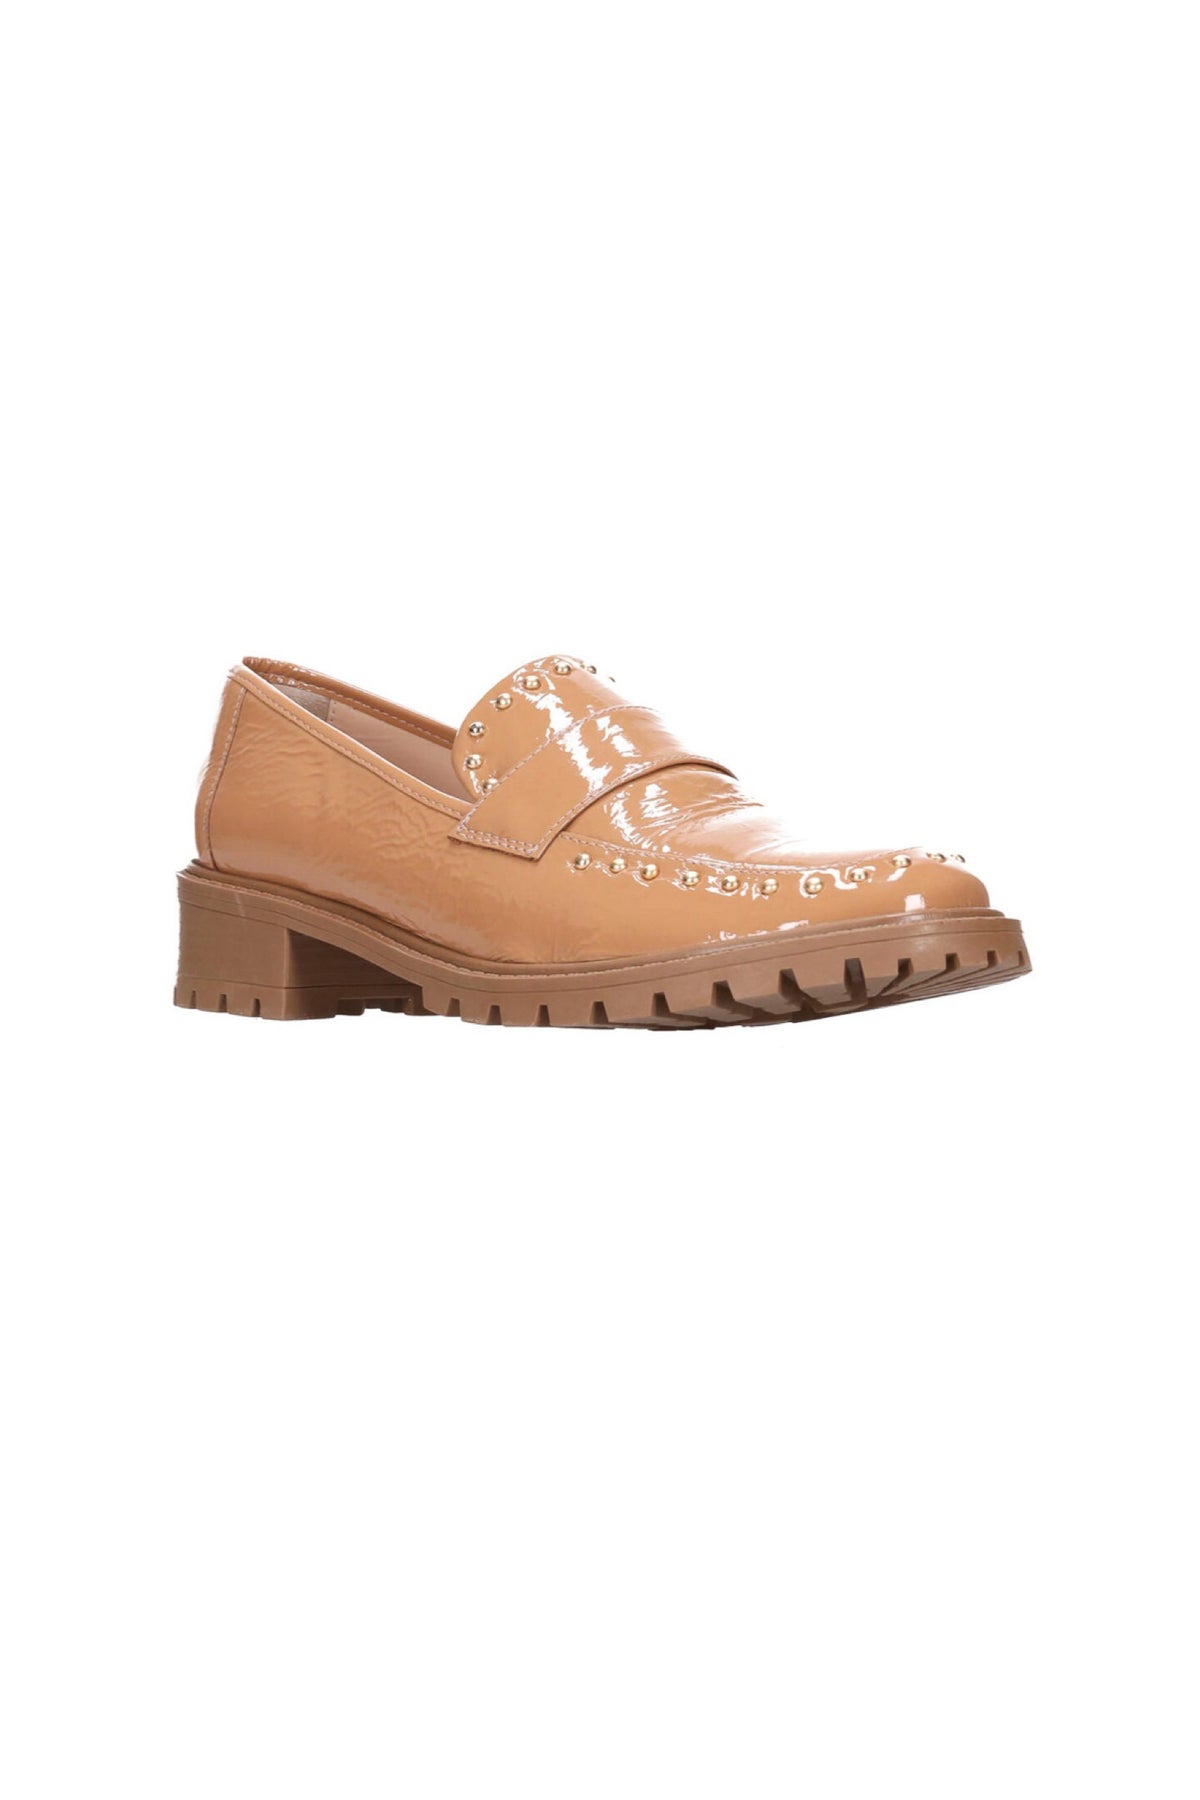 Brynlee Loafer Tan Patent